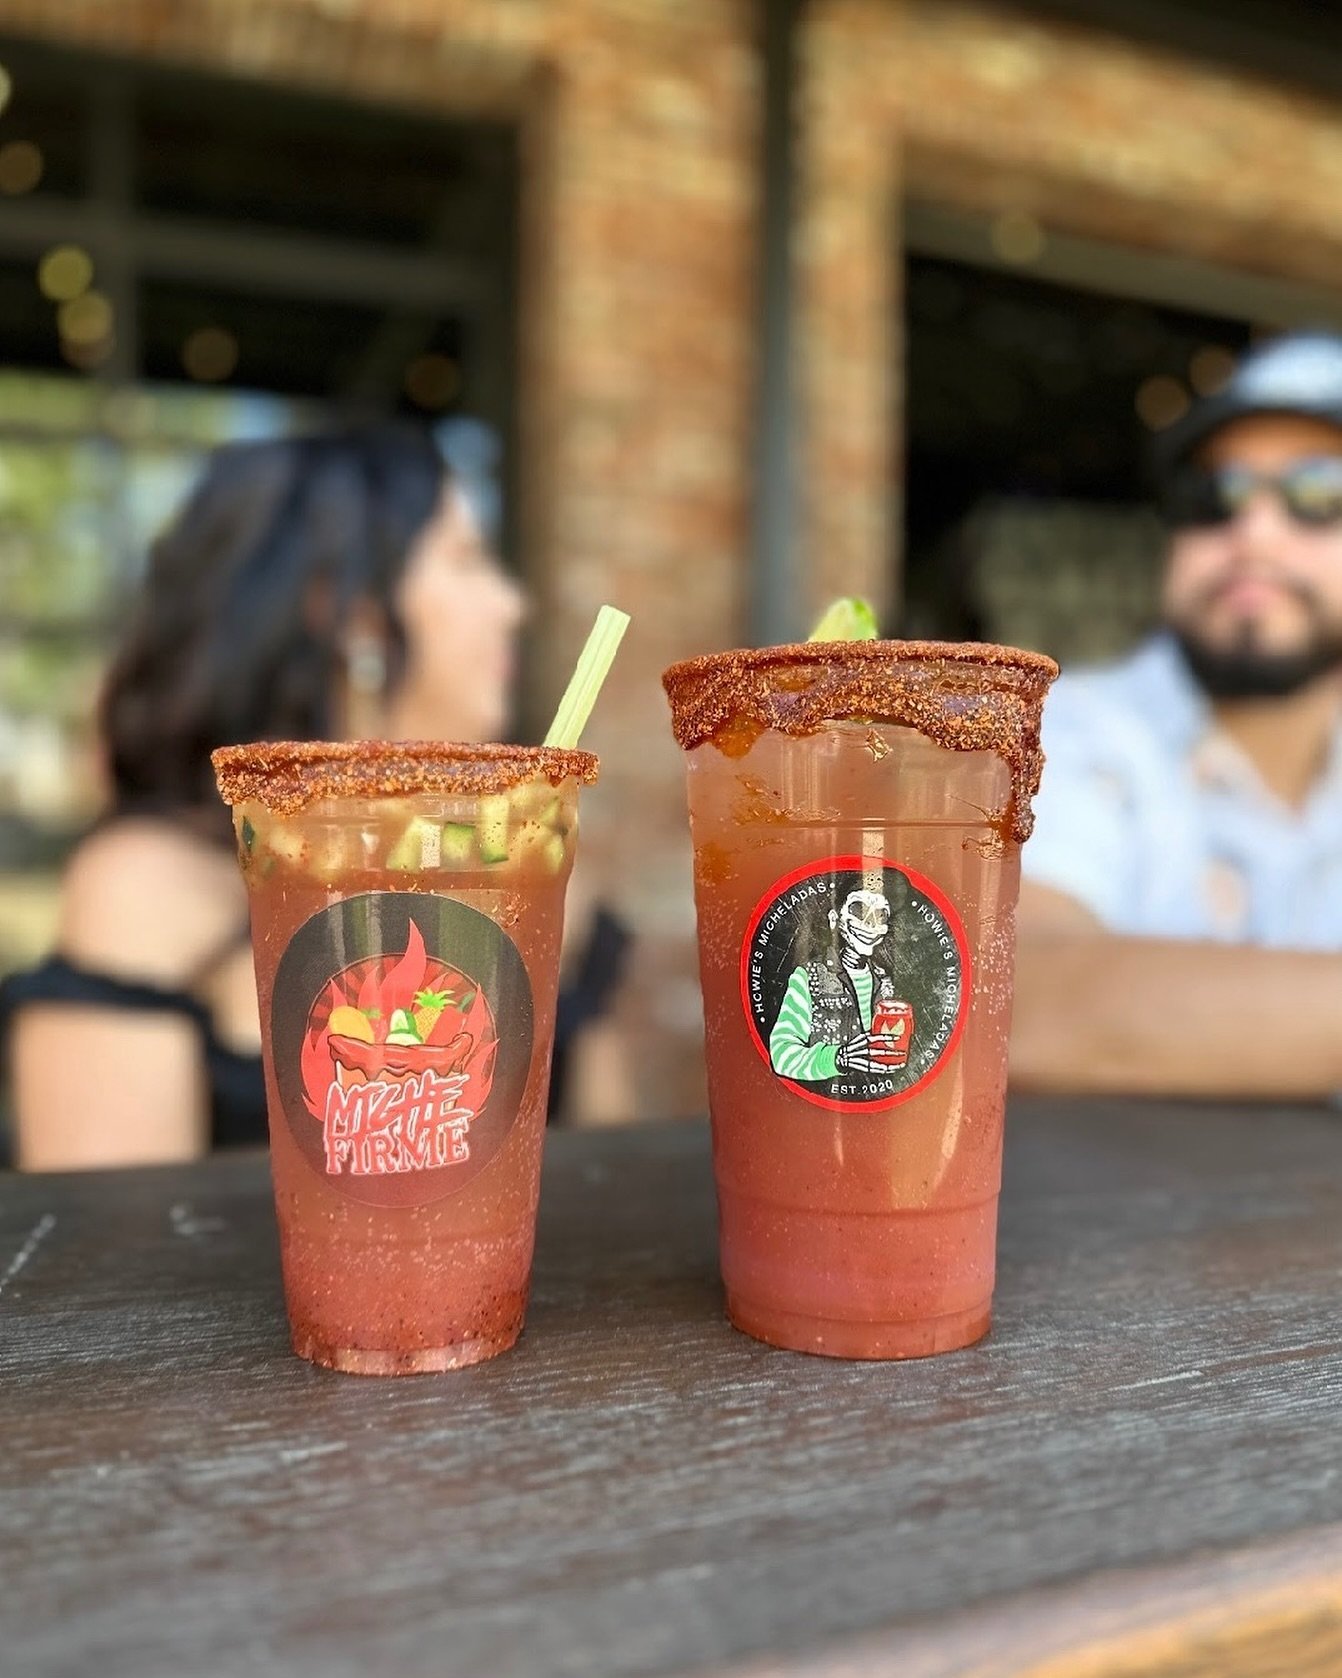 Mother&rsquo;s Day weekend is kicking off today with two full Michelada bars🌶️🍻
Open 11am - midnight
Cheers Moms✨
#goodpeoplegoodtimesgreatbeer